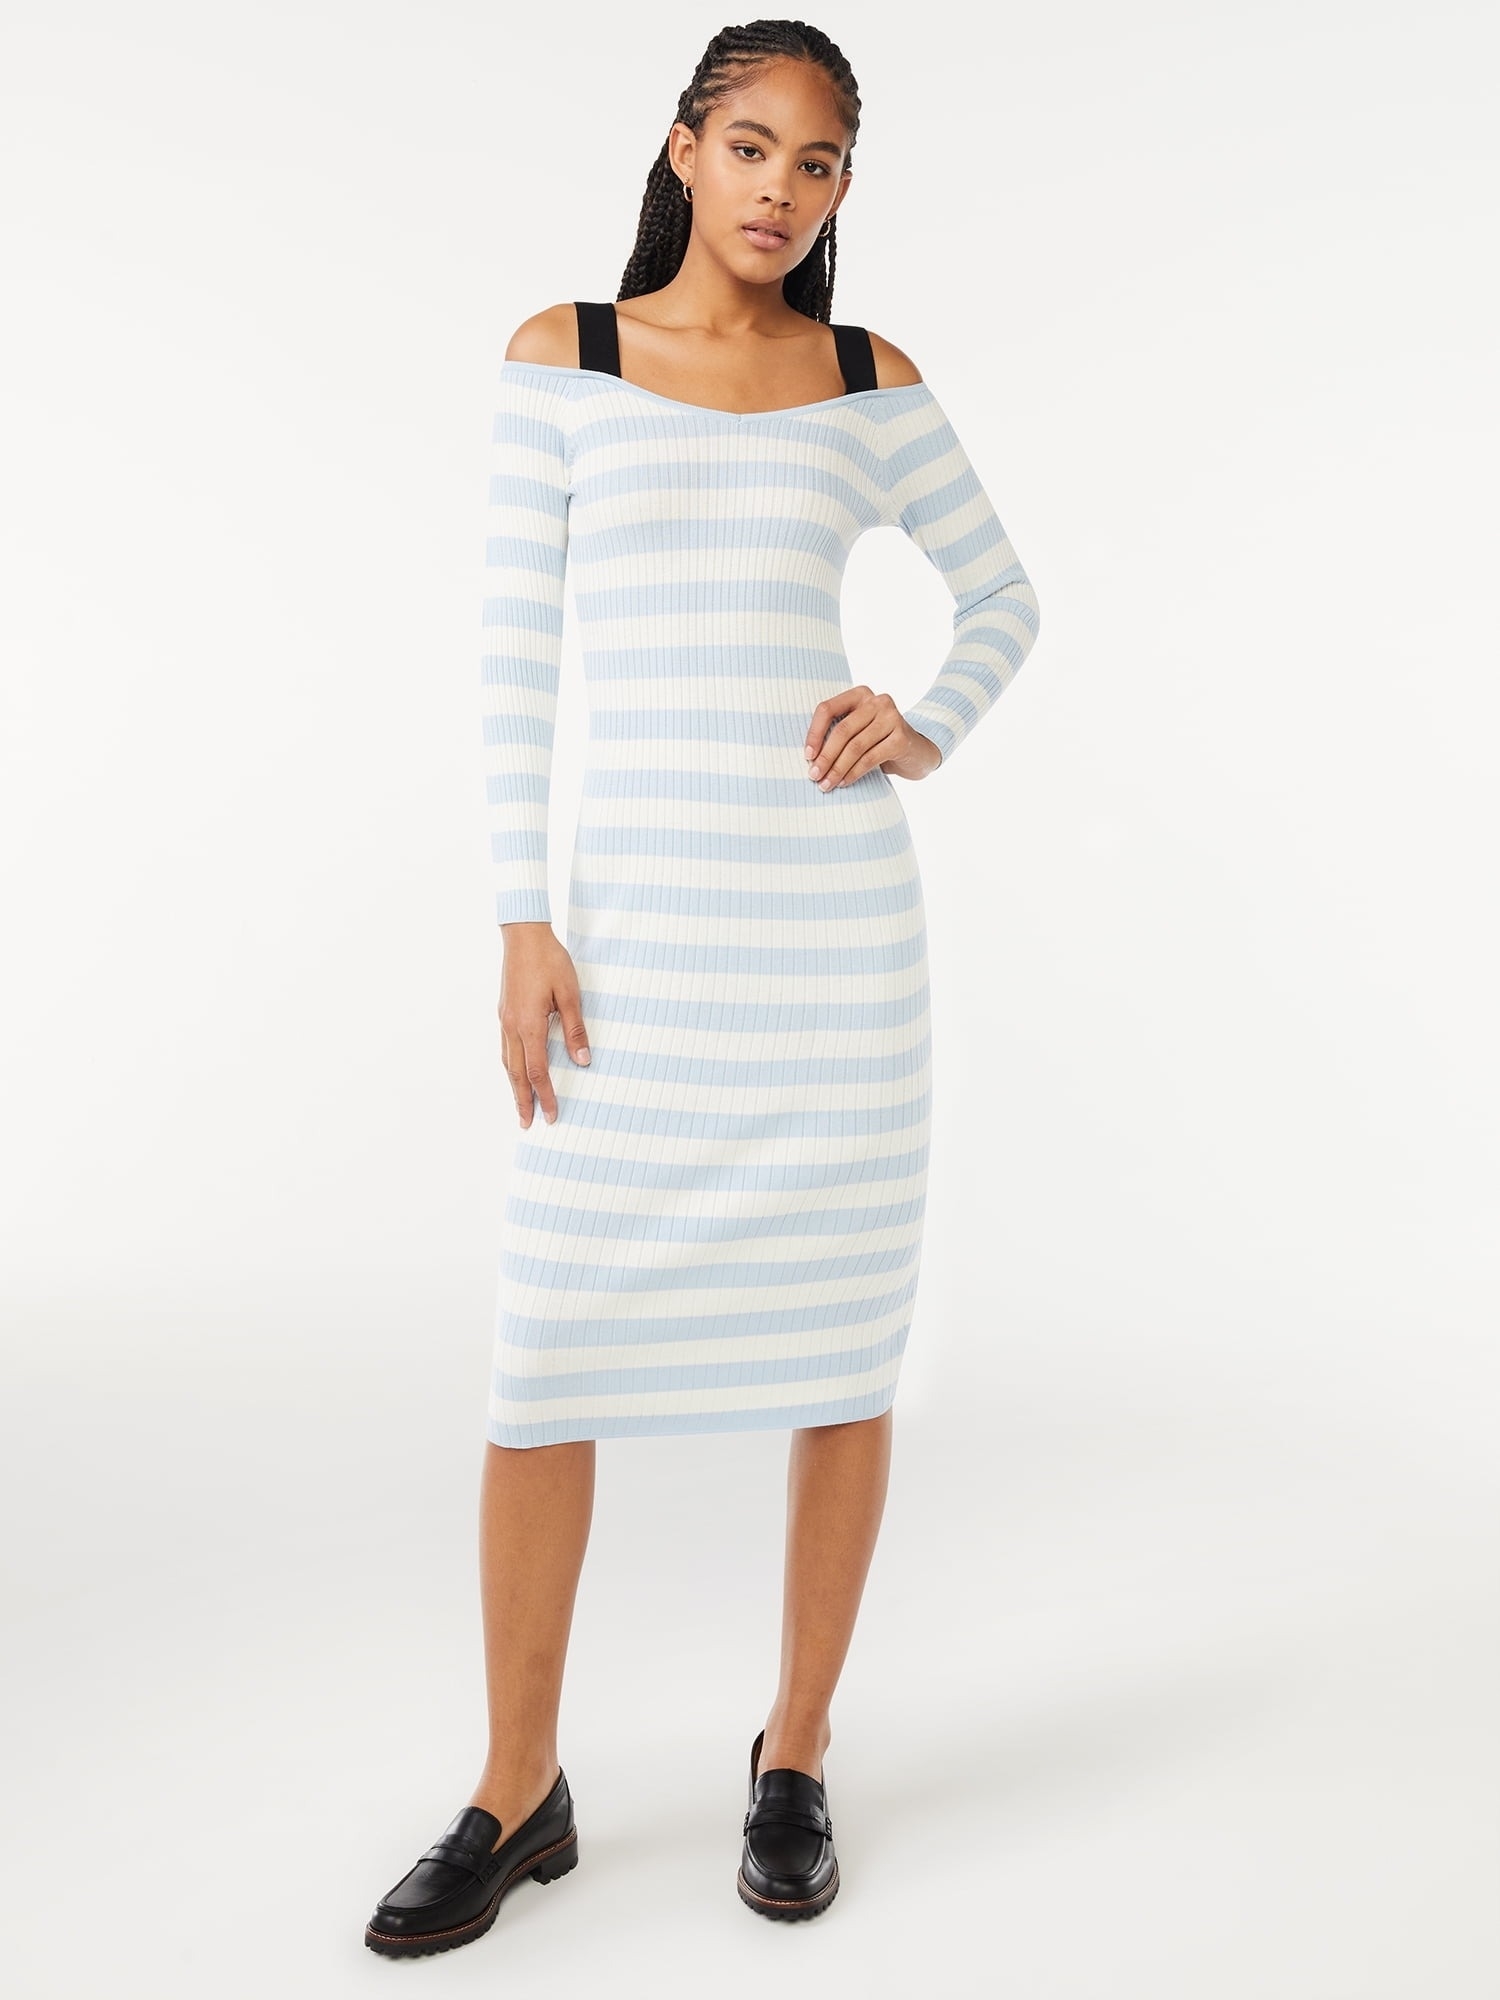 a model wearing the light blue and white striped dress